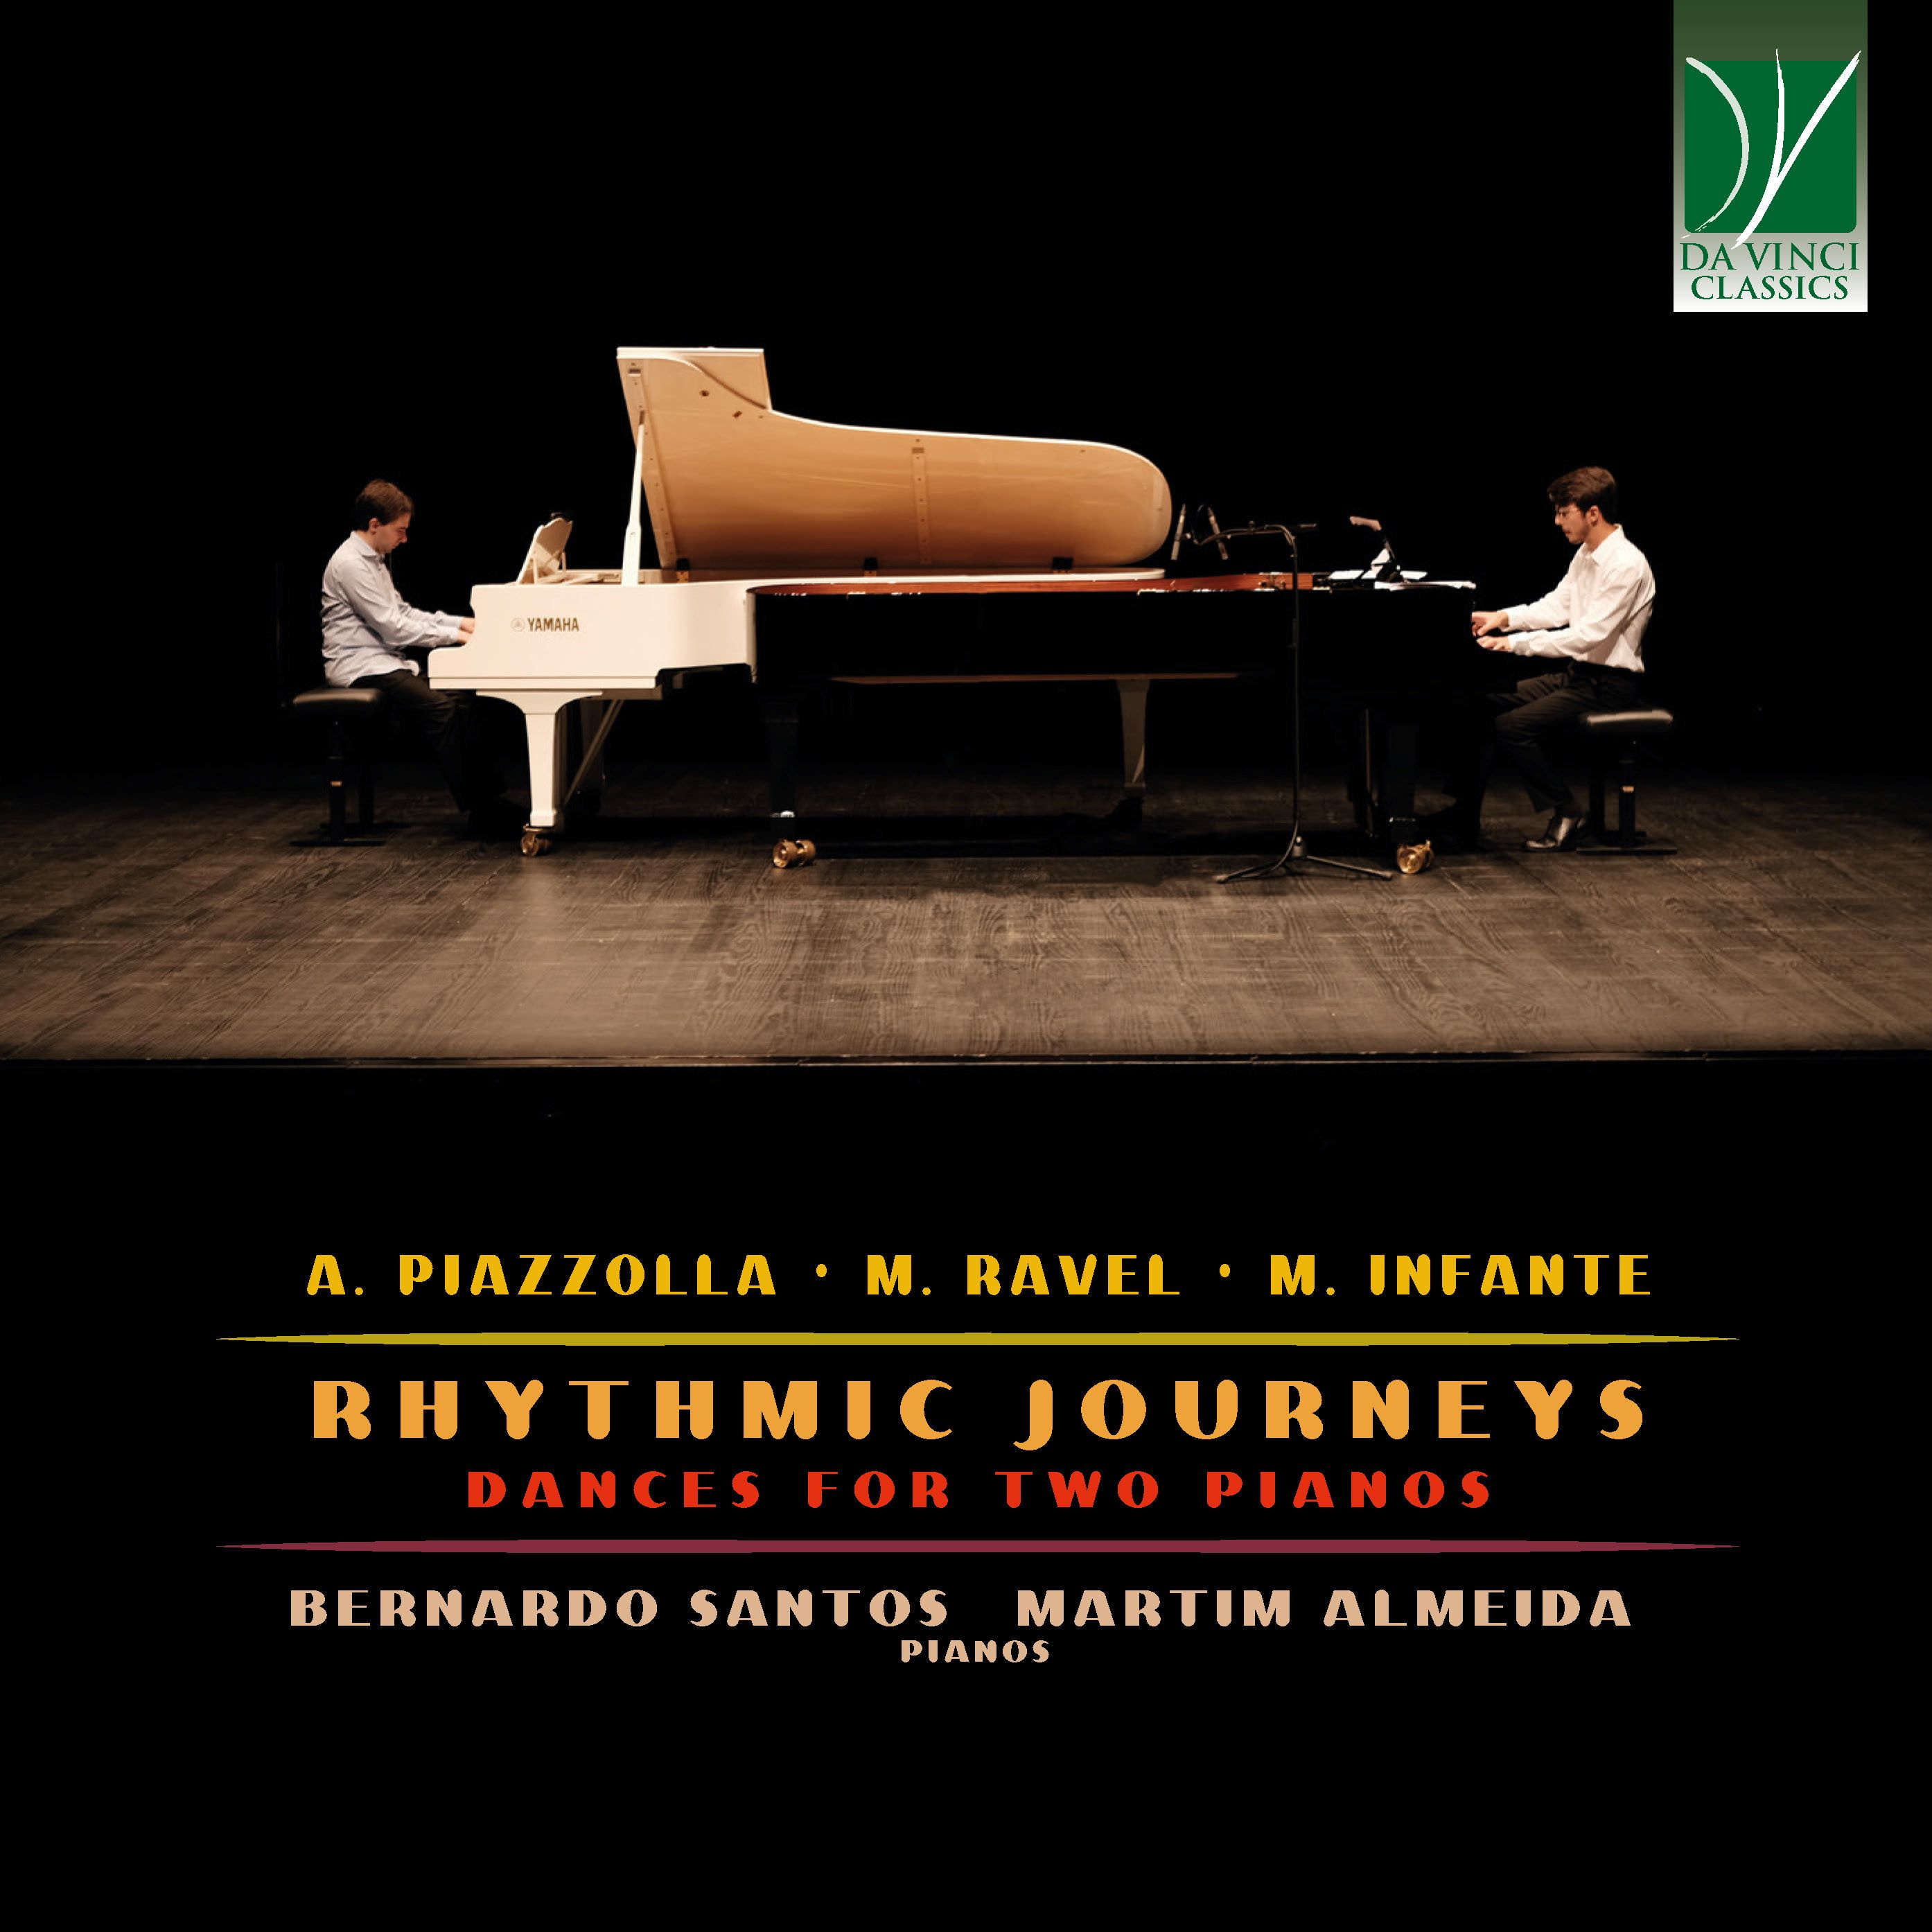 A. PIAZZOLLA, M. RAVEL, M. INFANTE: RHYTHMIC JOURNEYS, DANCES FOR TWO PIANOS